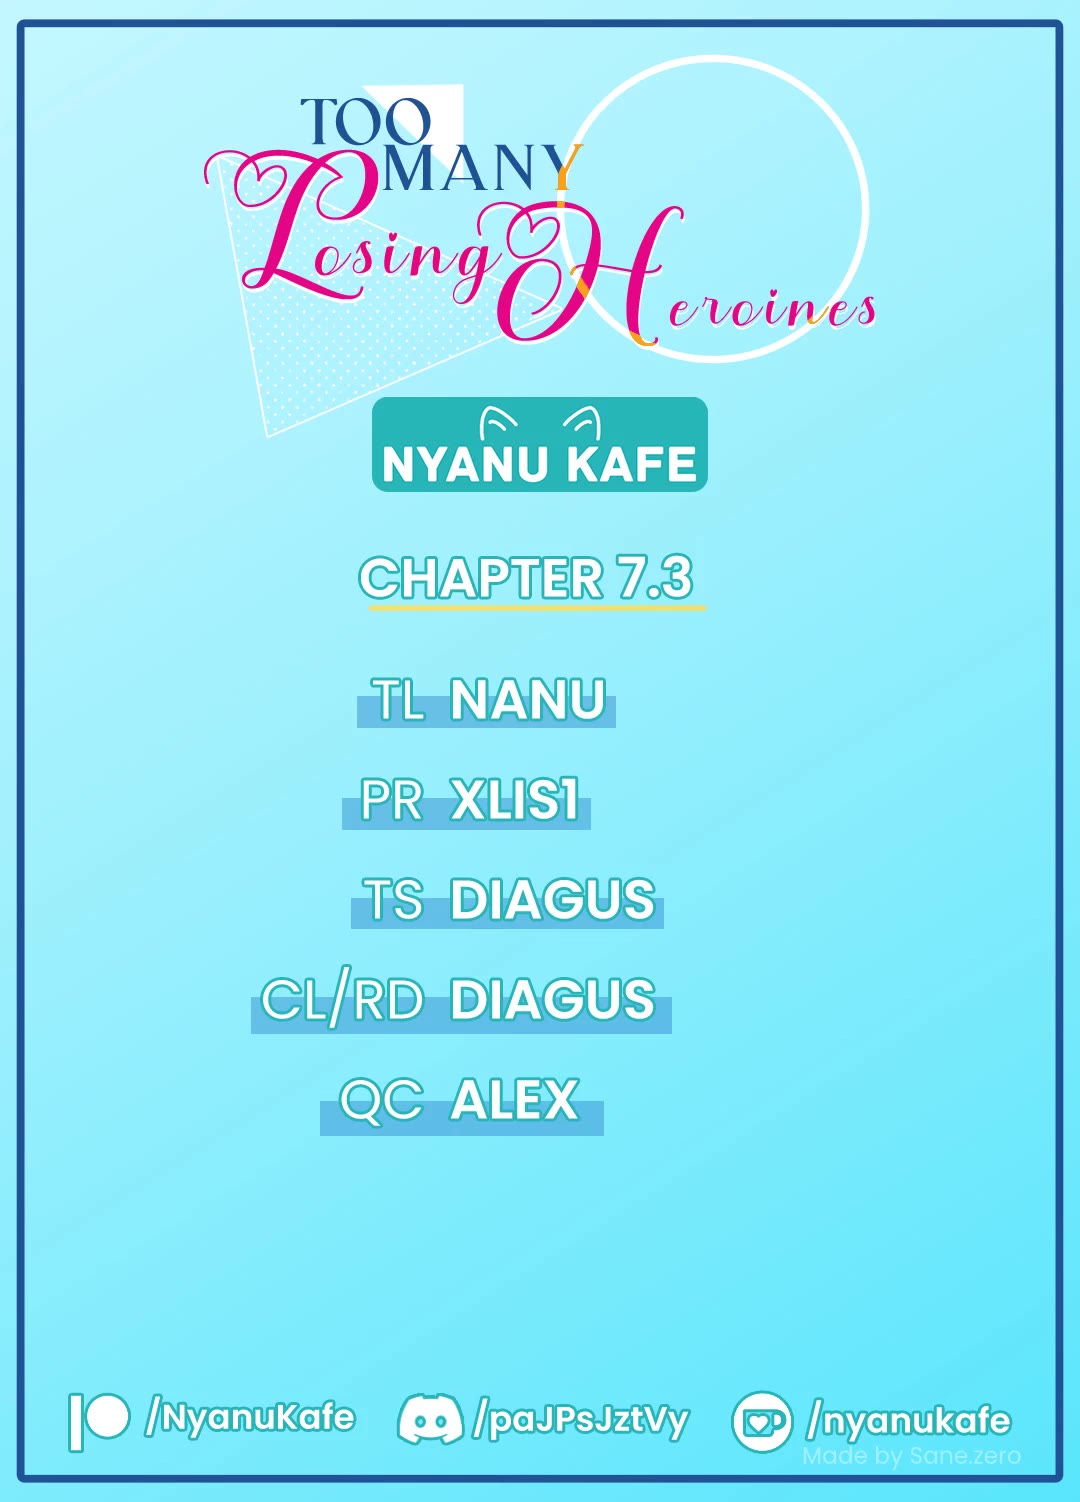 Too Many Losing Heroines! Chapter 7.3